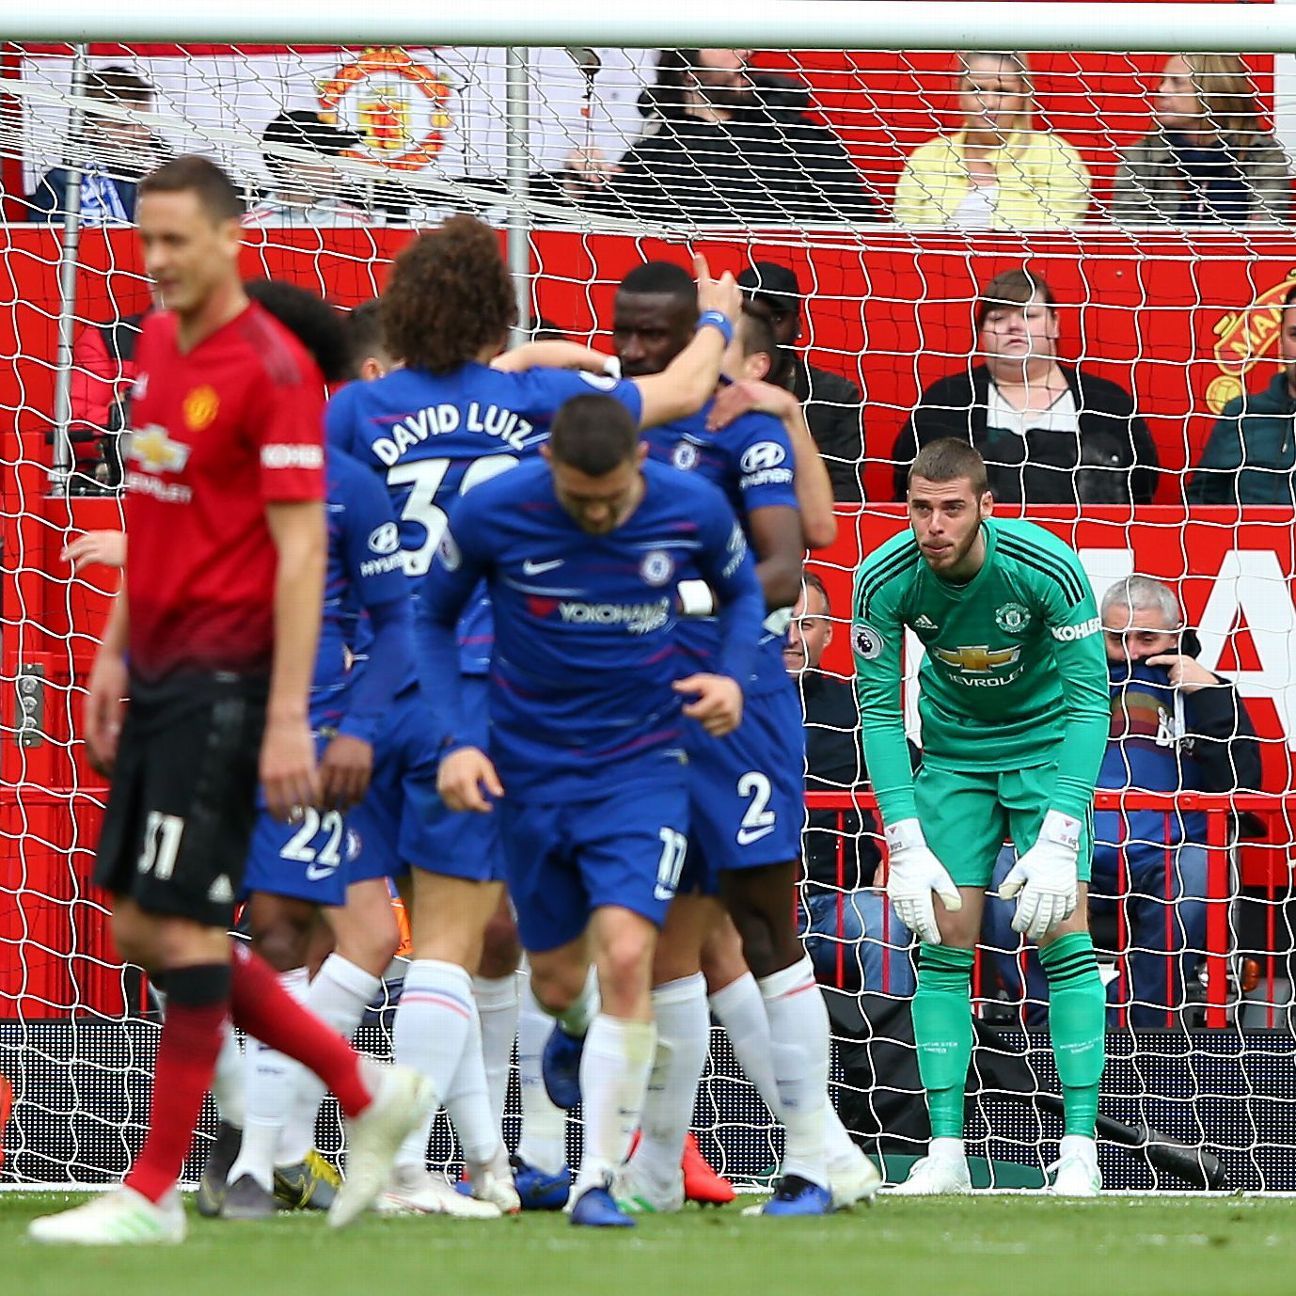 Manchester United vs. Chelsea - Football Match Summary - April 28, 2019